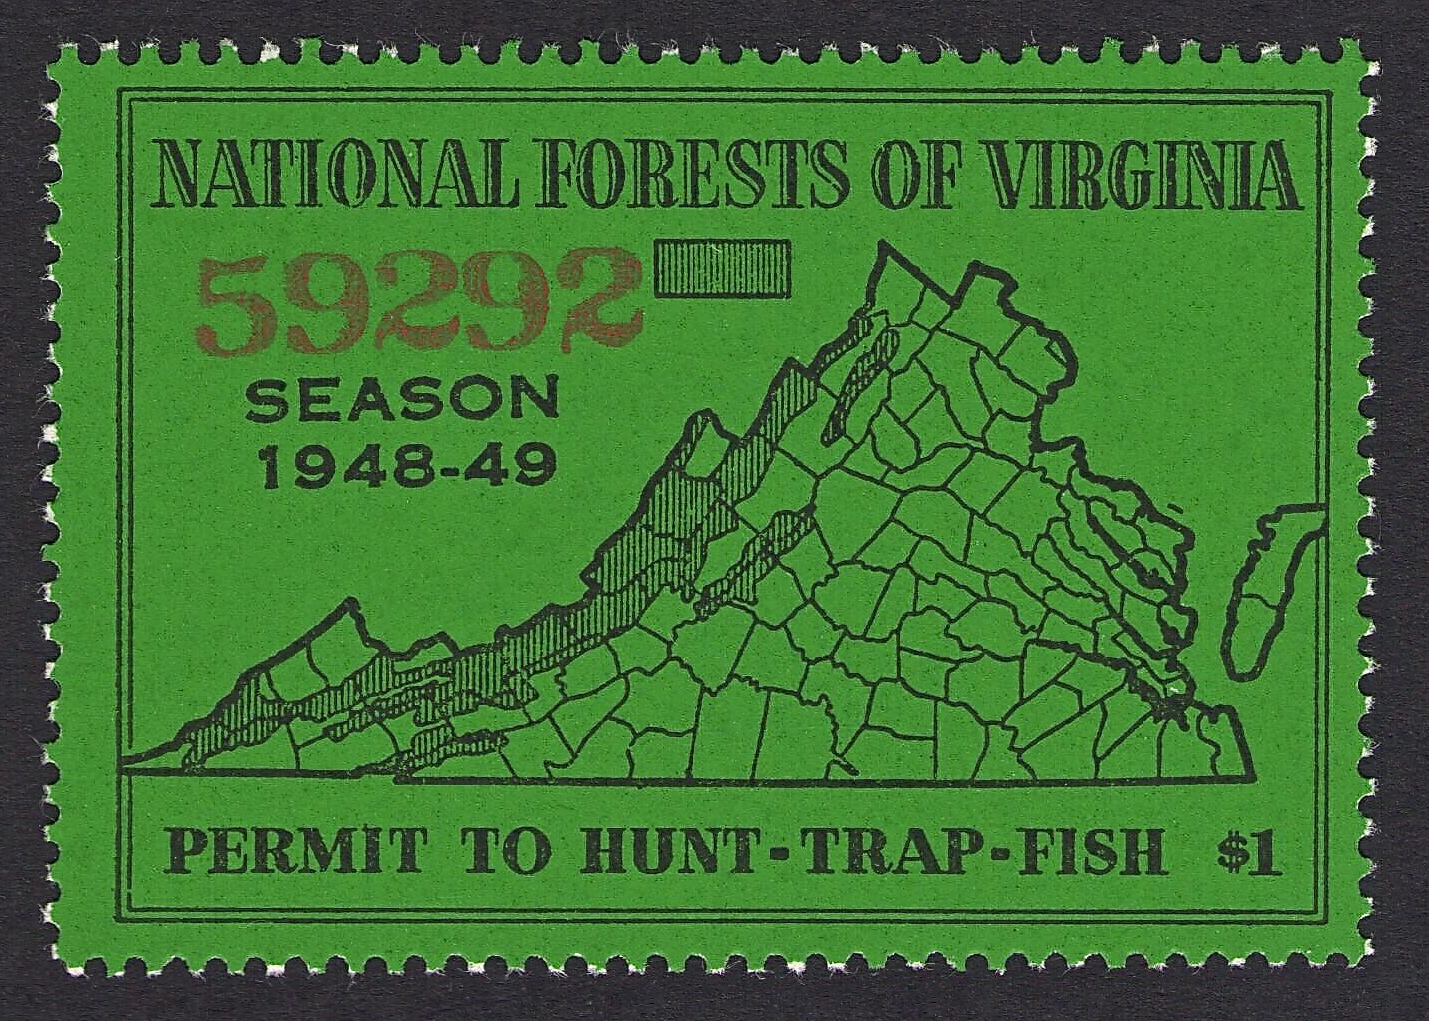 1948-49 National Forest Virginia